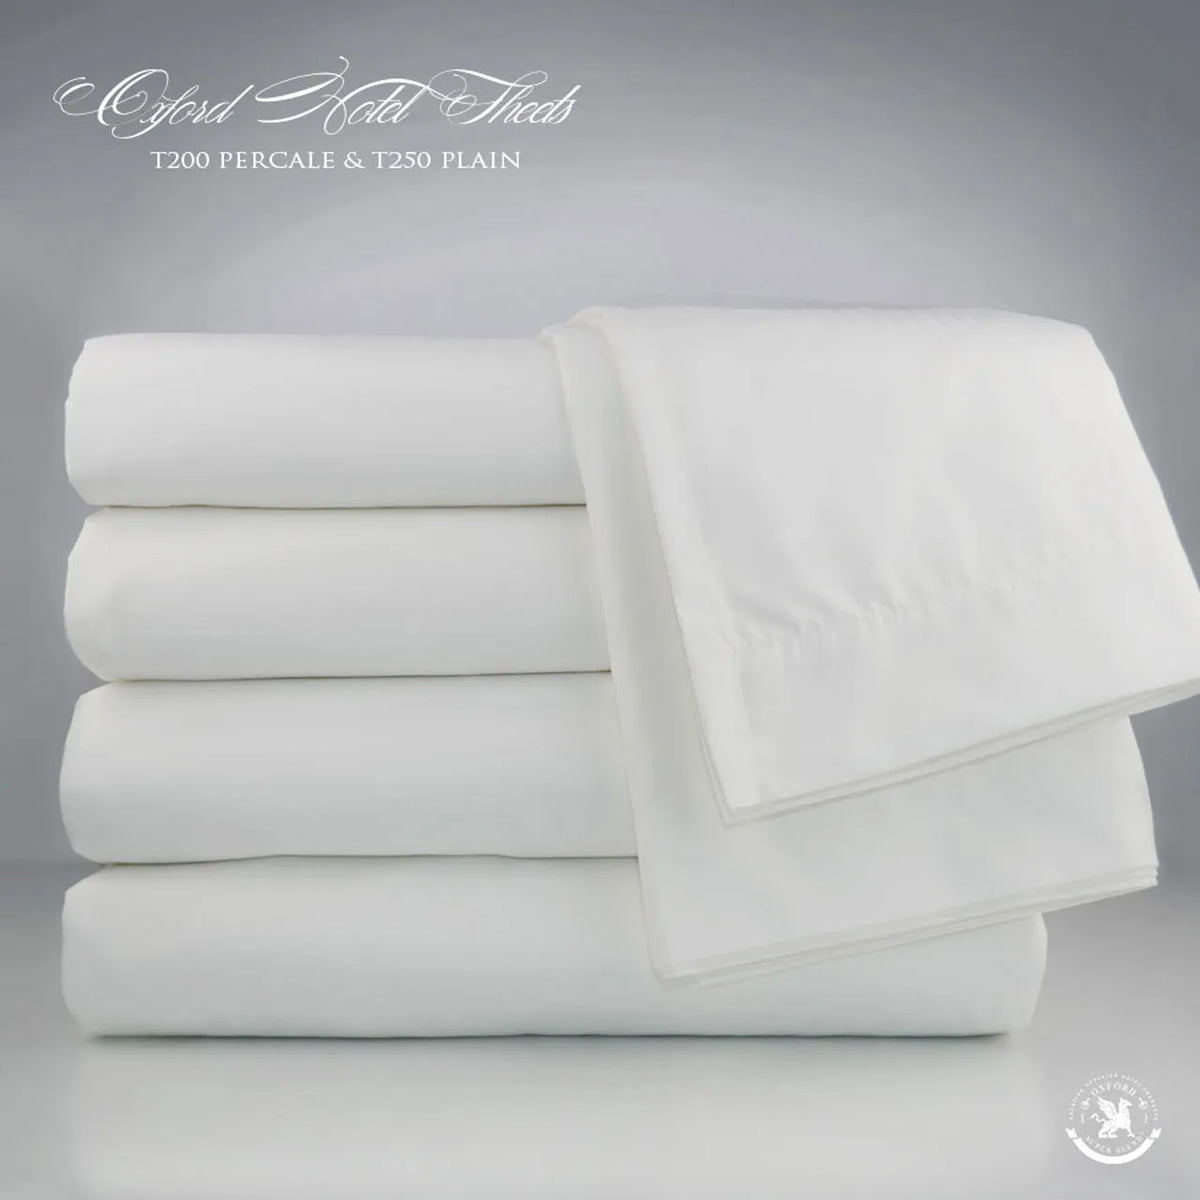 Fitted Sheets - Oxford T250 Satin Bed Linen